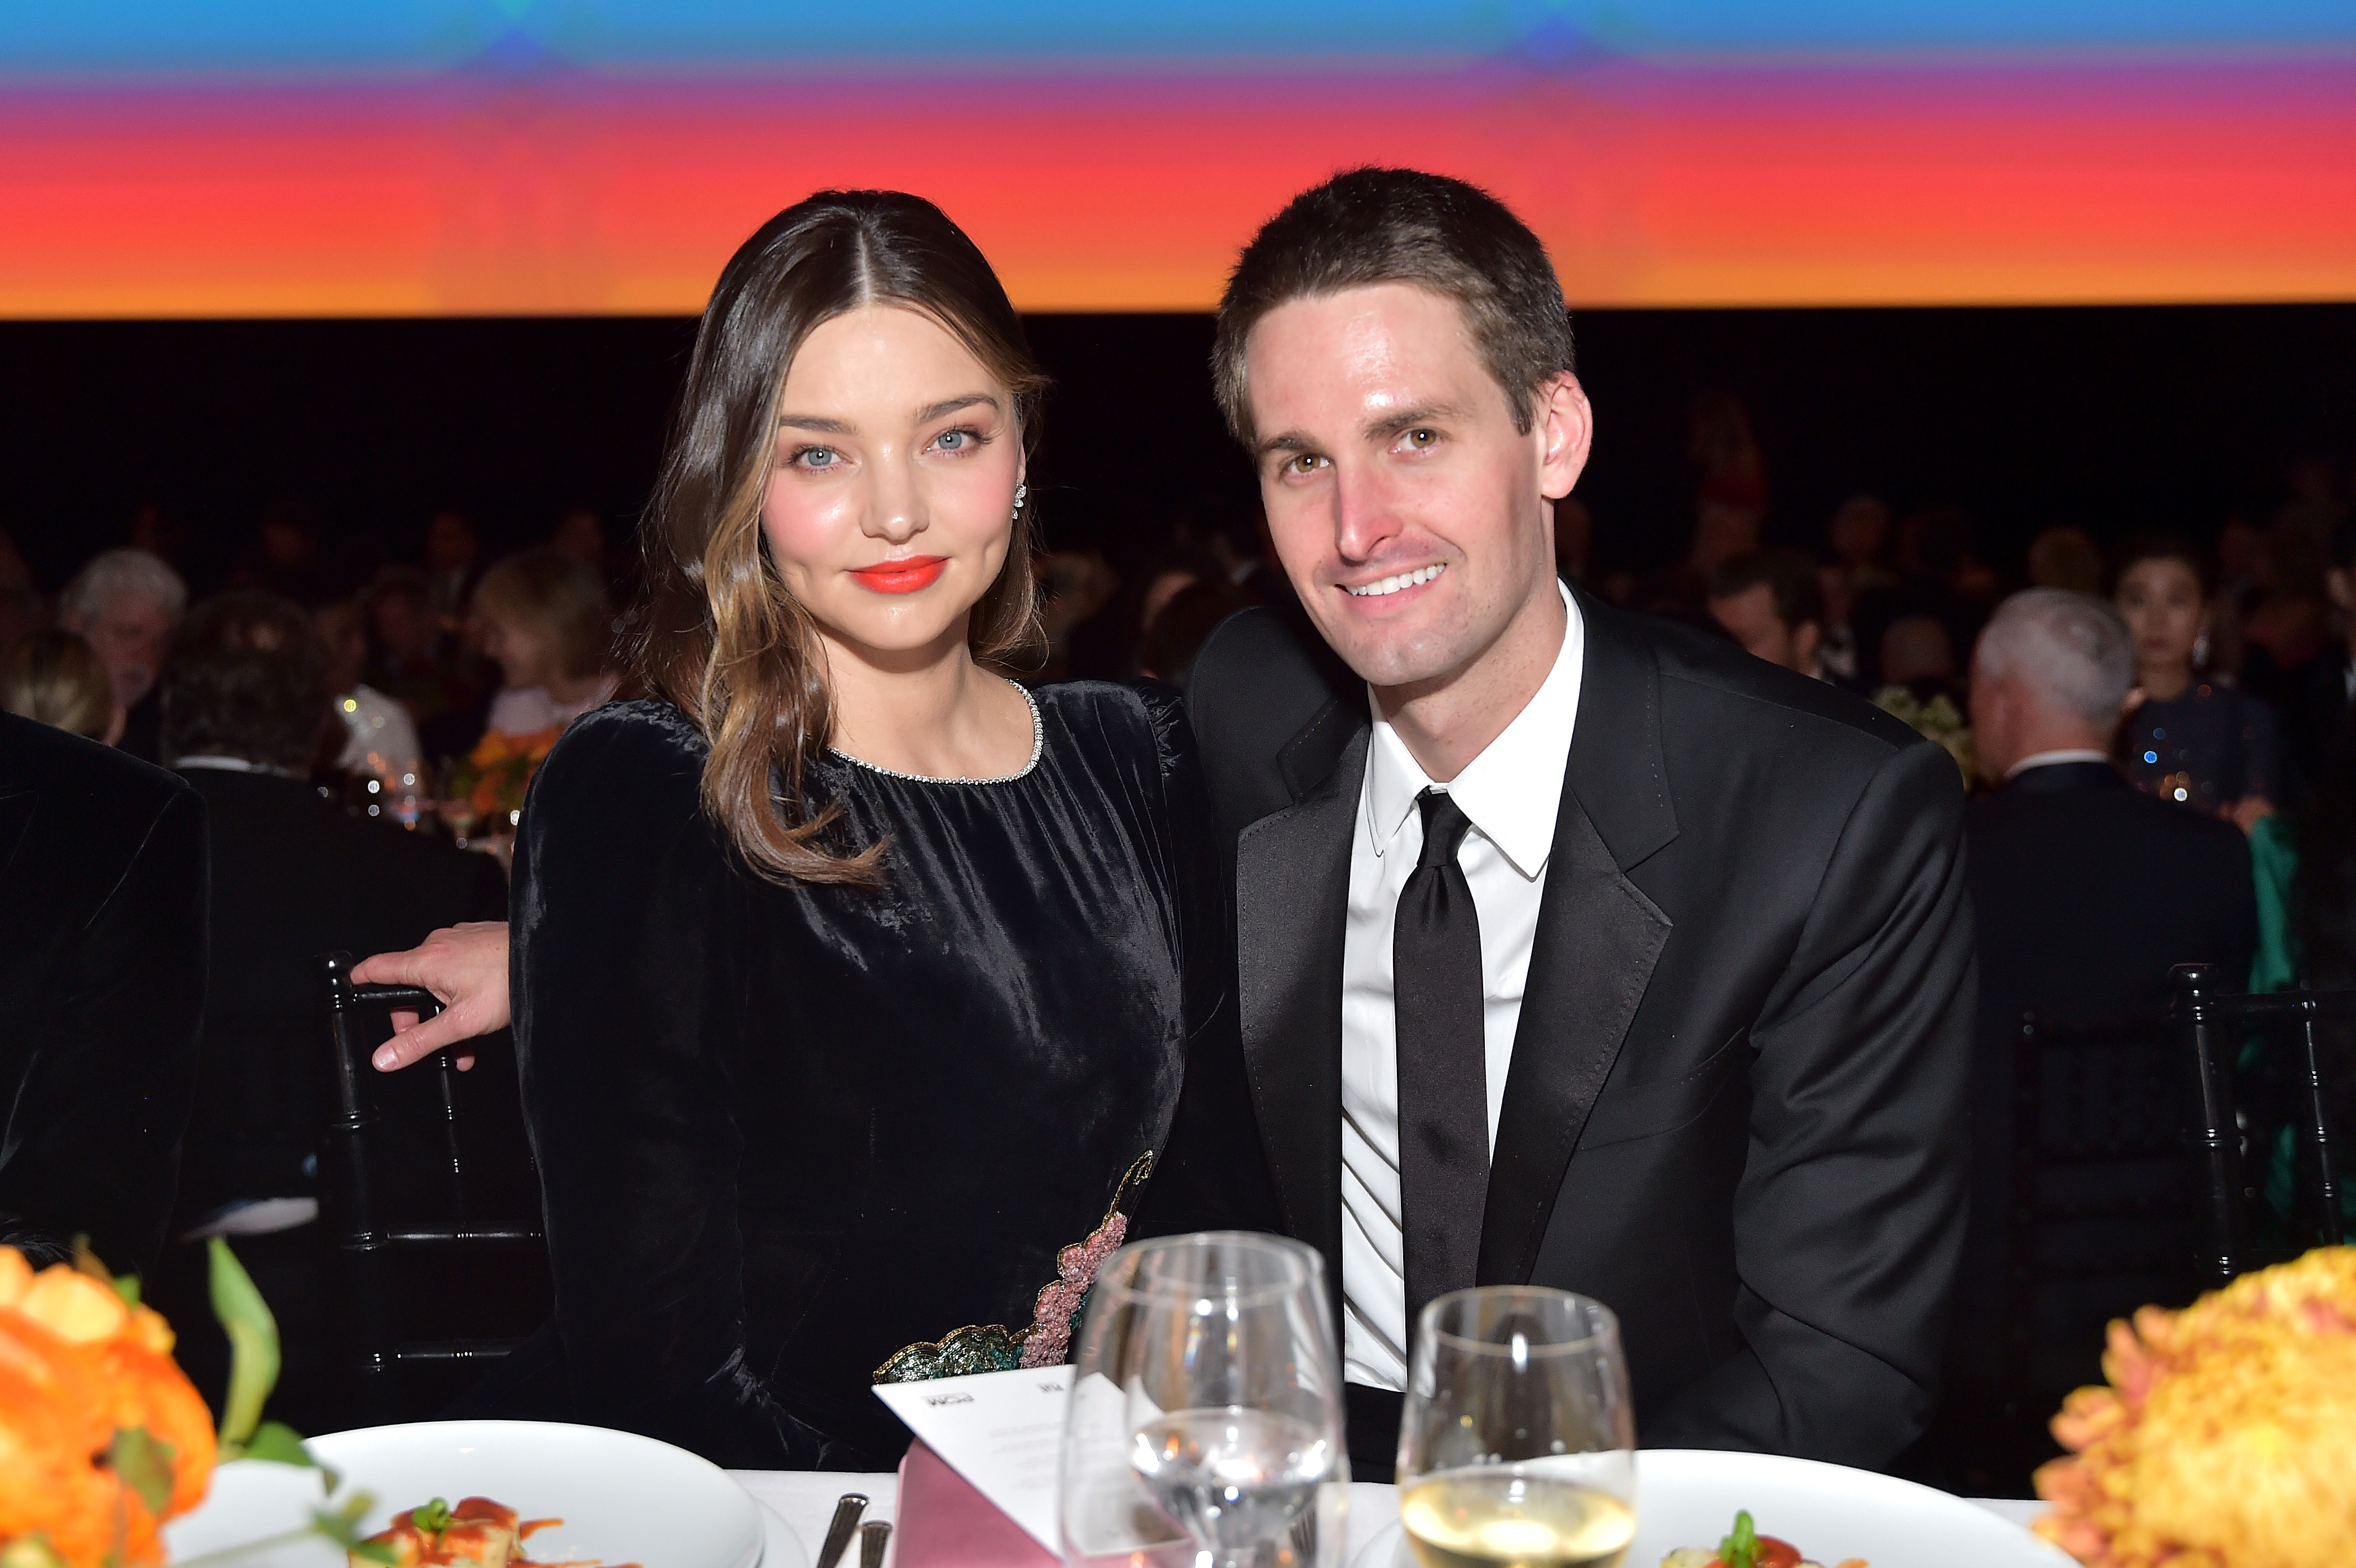 Miranda Kerr and Evan Spiegel attend 2018 LACMA Art + Film Gala on November 3, 2018 in Los Angeles, California | Source: Getty Images